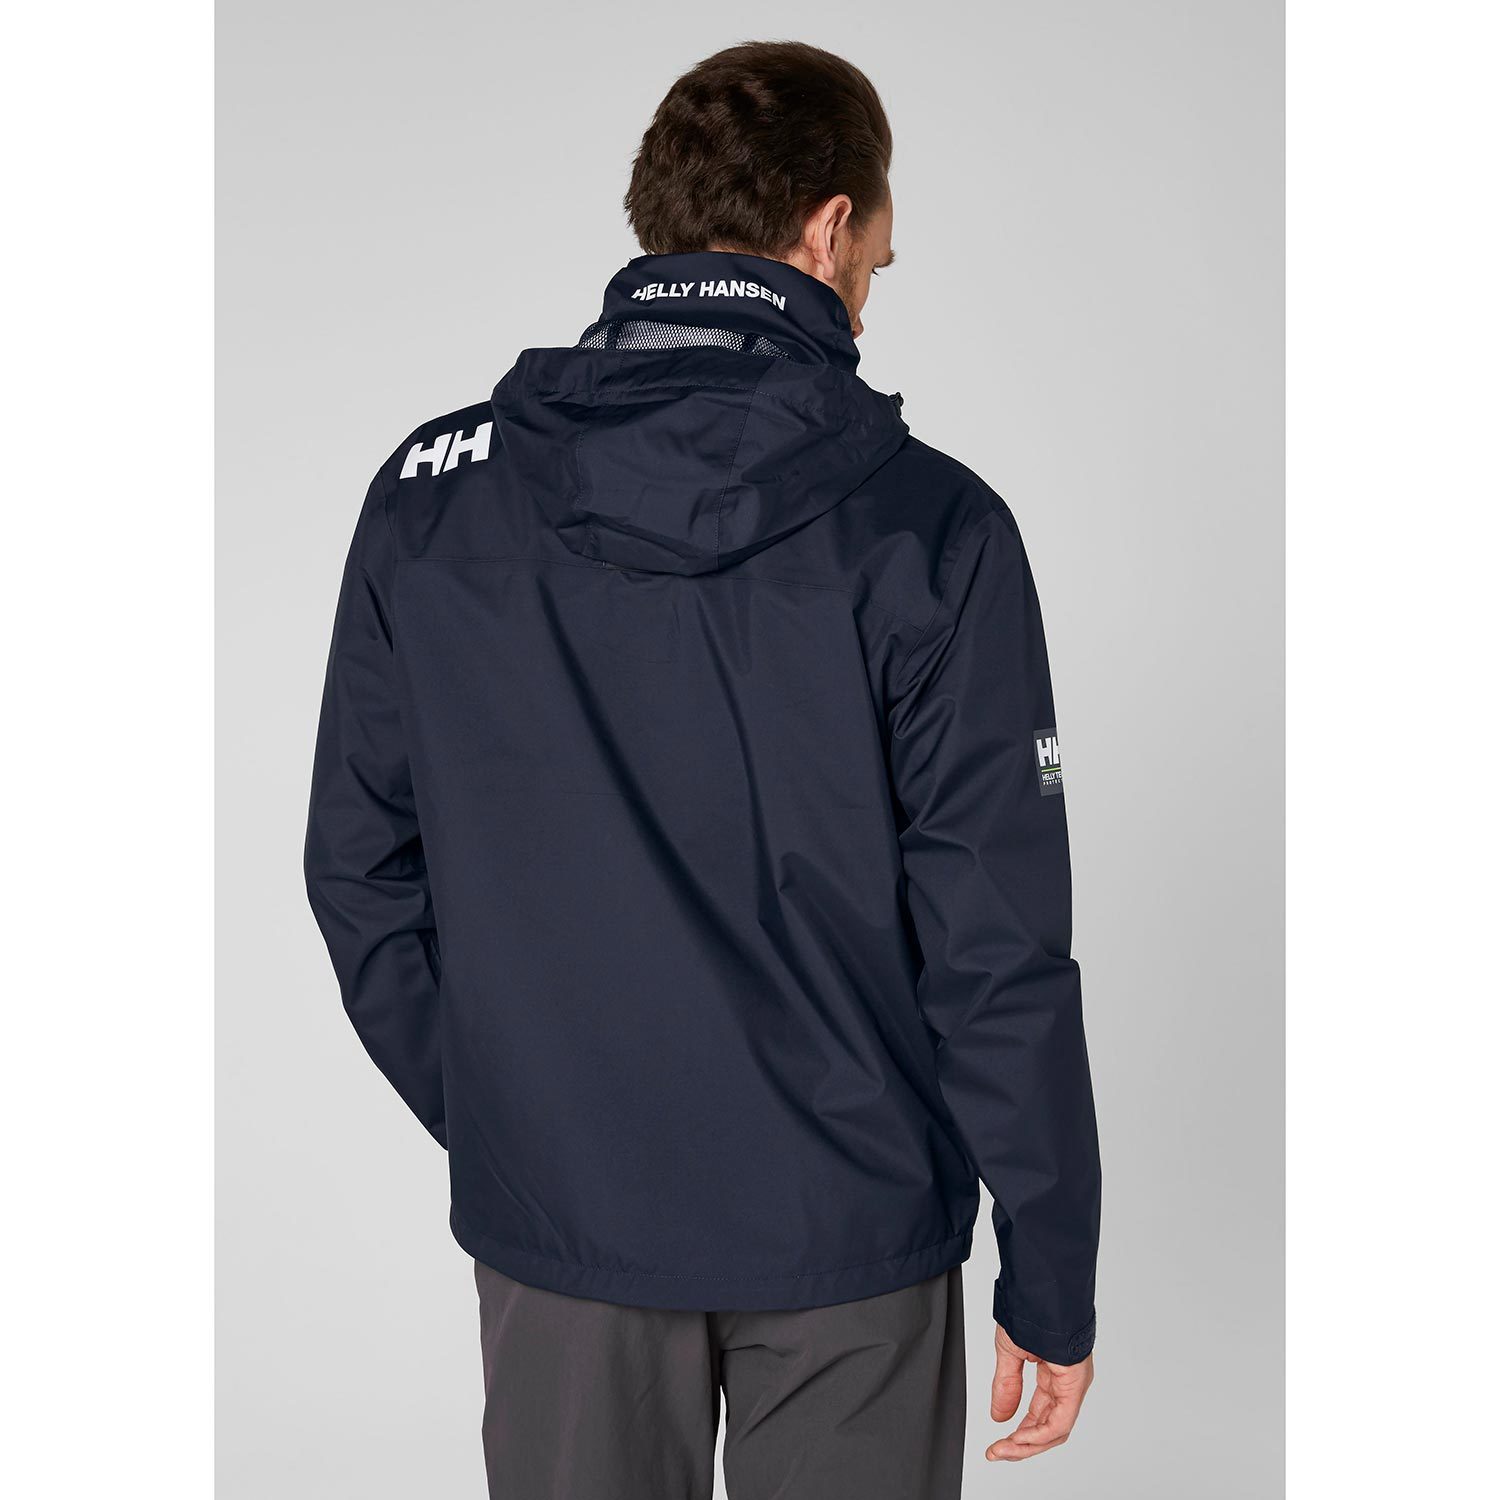 Helly Hansen Womens Crew Hooded Jacket Navy Breathable Yachting Cruising Boat 